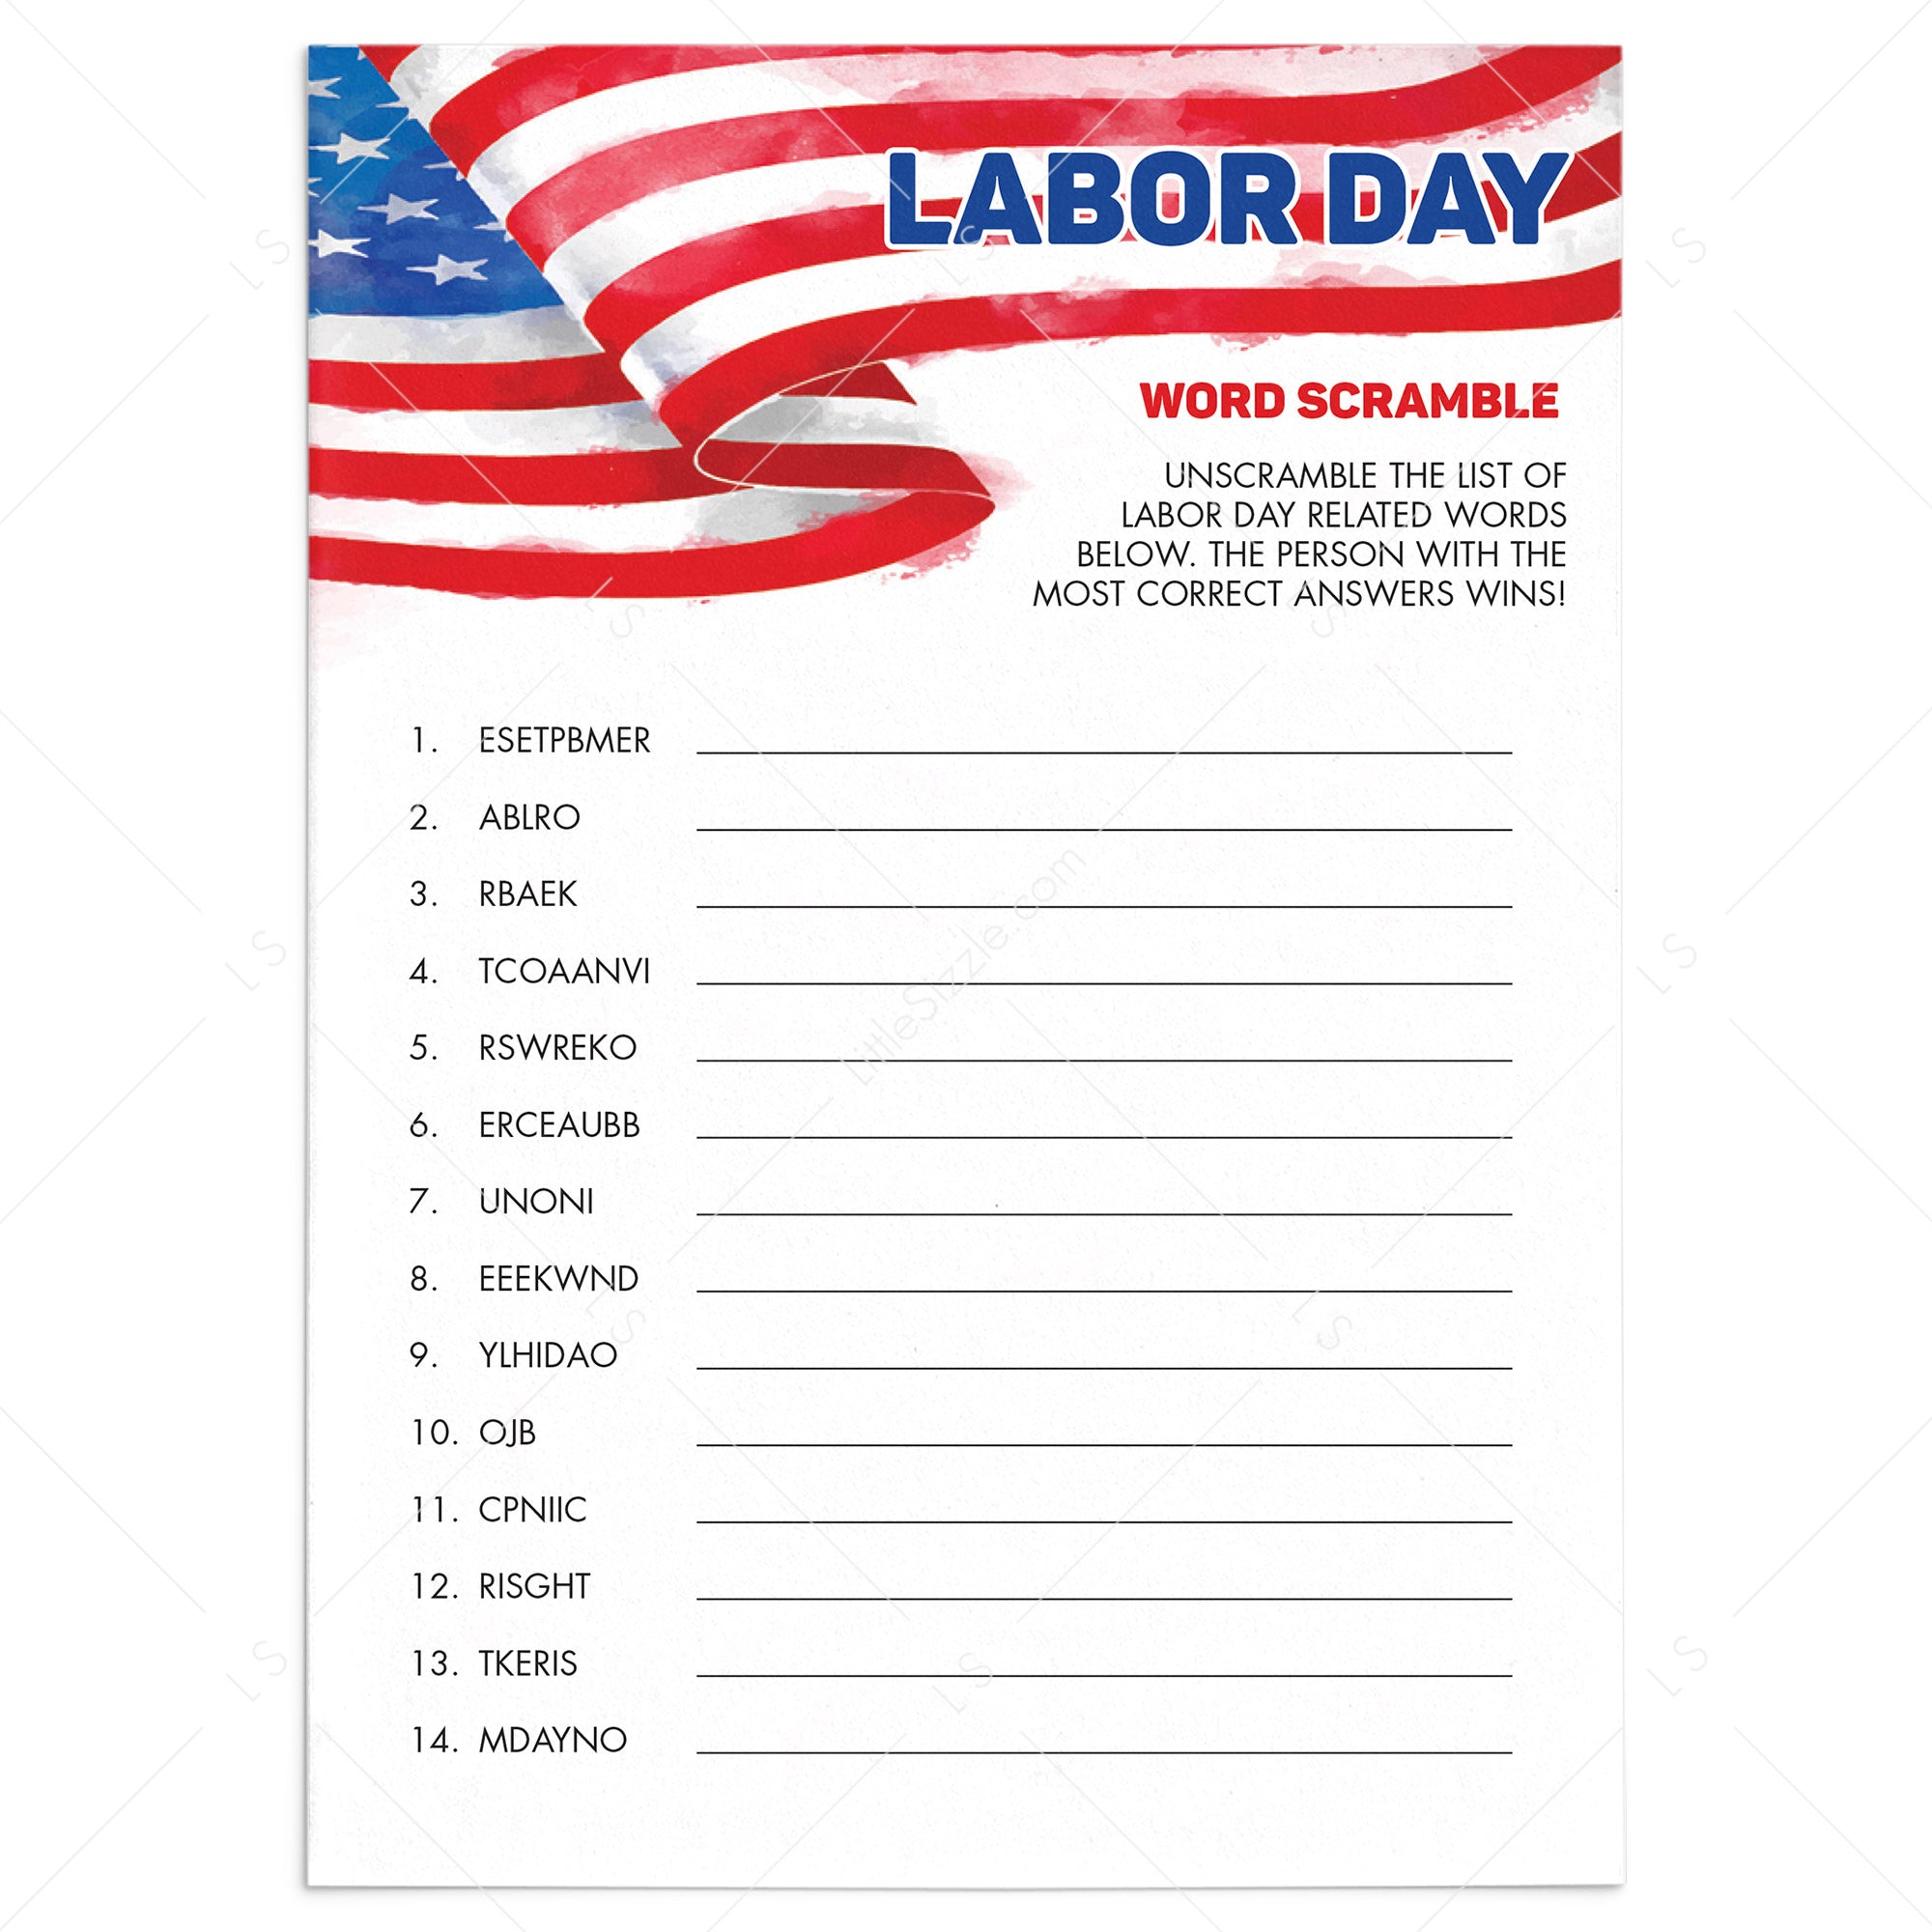 labor-day-word-scramble-game-printable-instant-download-littlesizzle